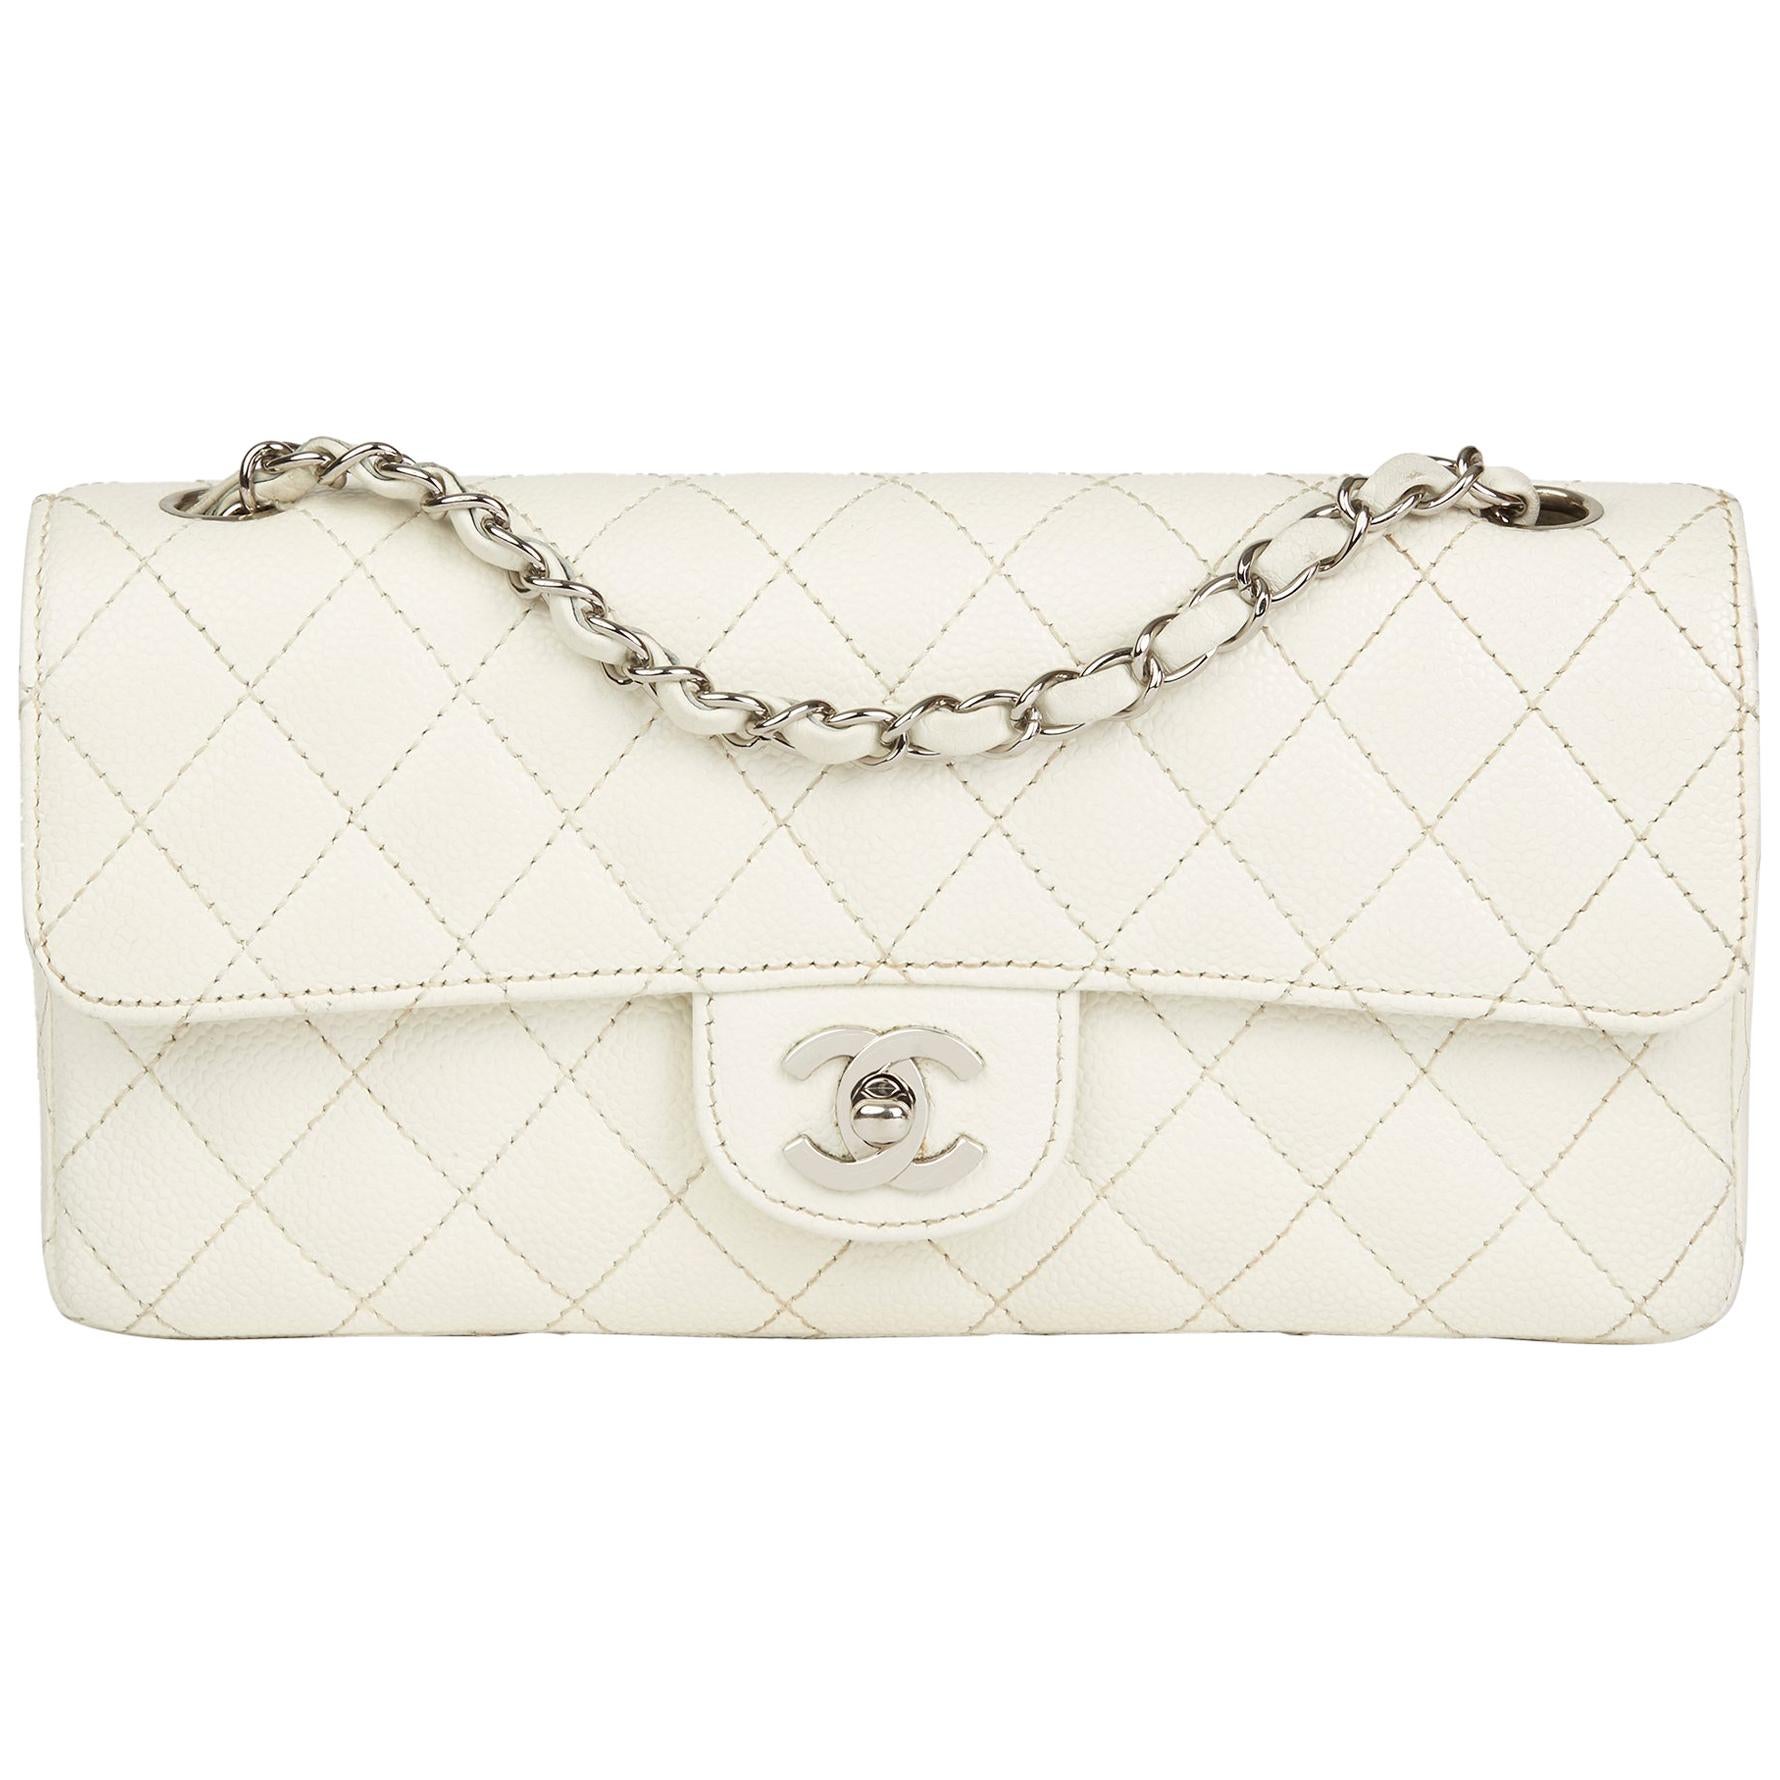 2005 Chanel White Quilted Caviar Leather East West Classic Single Flap Bag